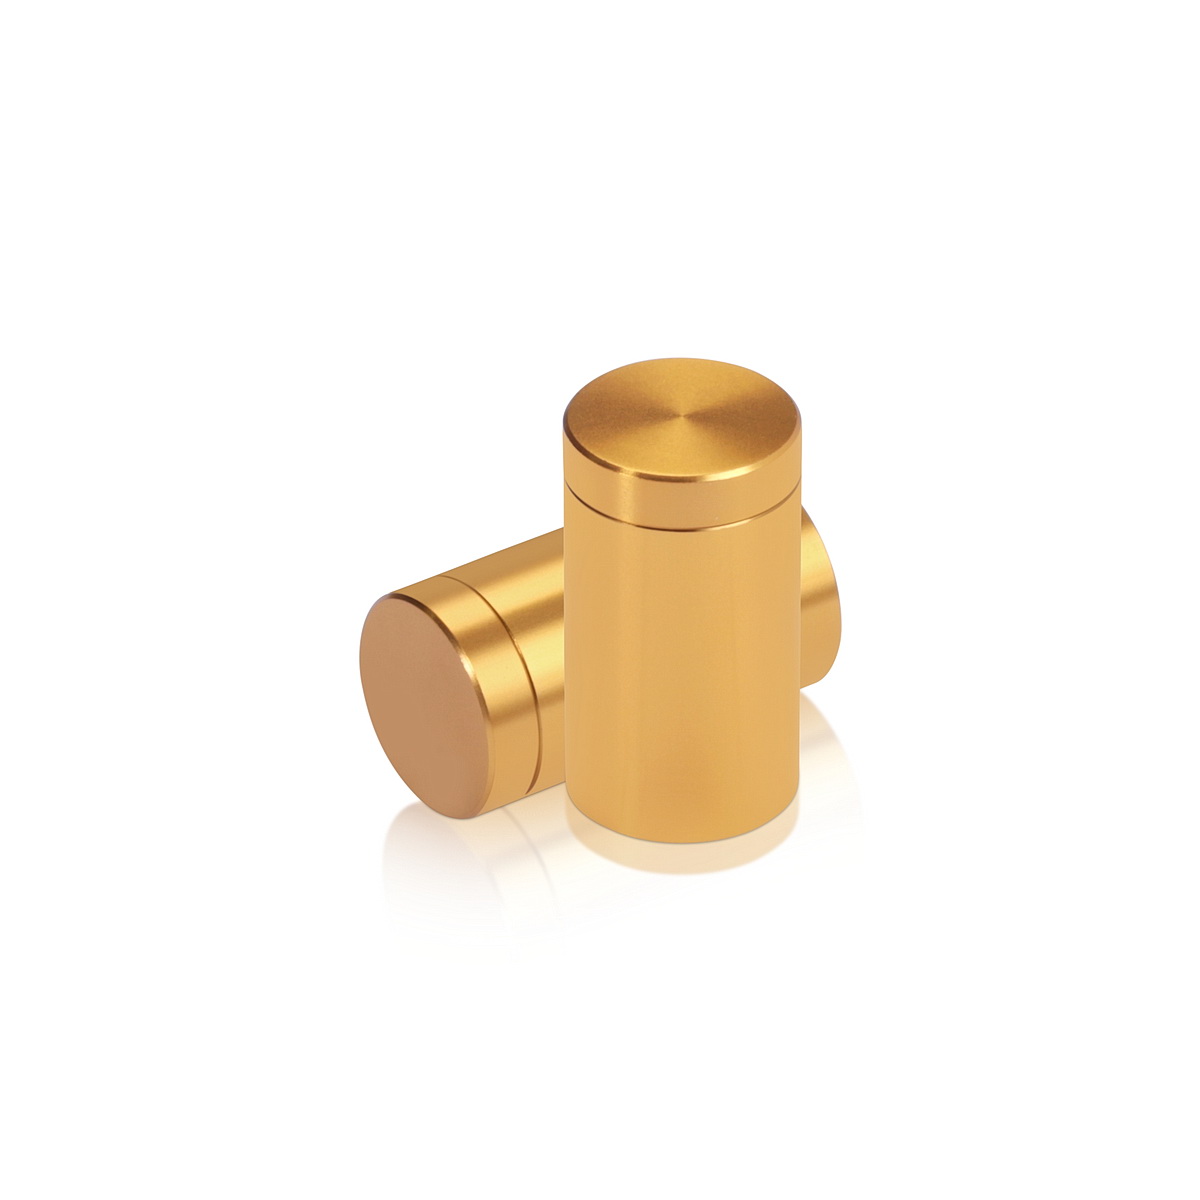 5/8'' Diameter X 1'' Barrel Length, Affordable Aluminum Standoffs, Gold Anodized Finish Easy Fasten Standoff (For Inside / Outside use) [Required Material Hole Size: 7/16'']